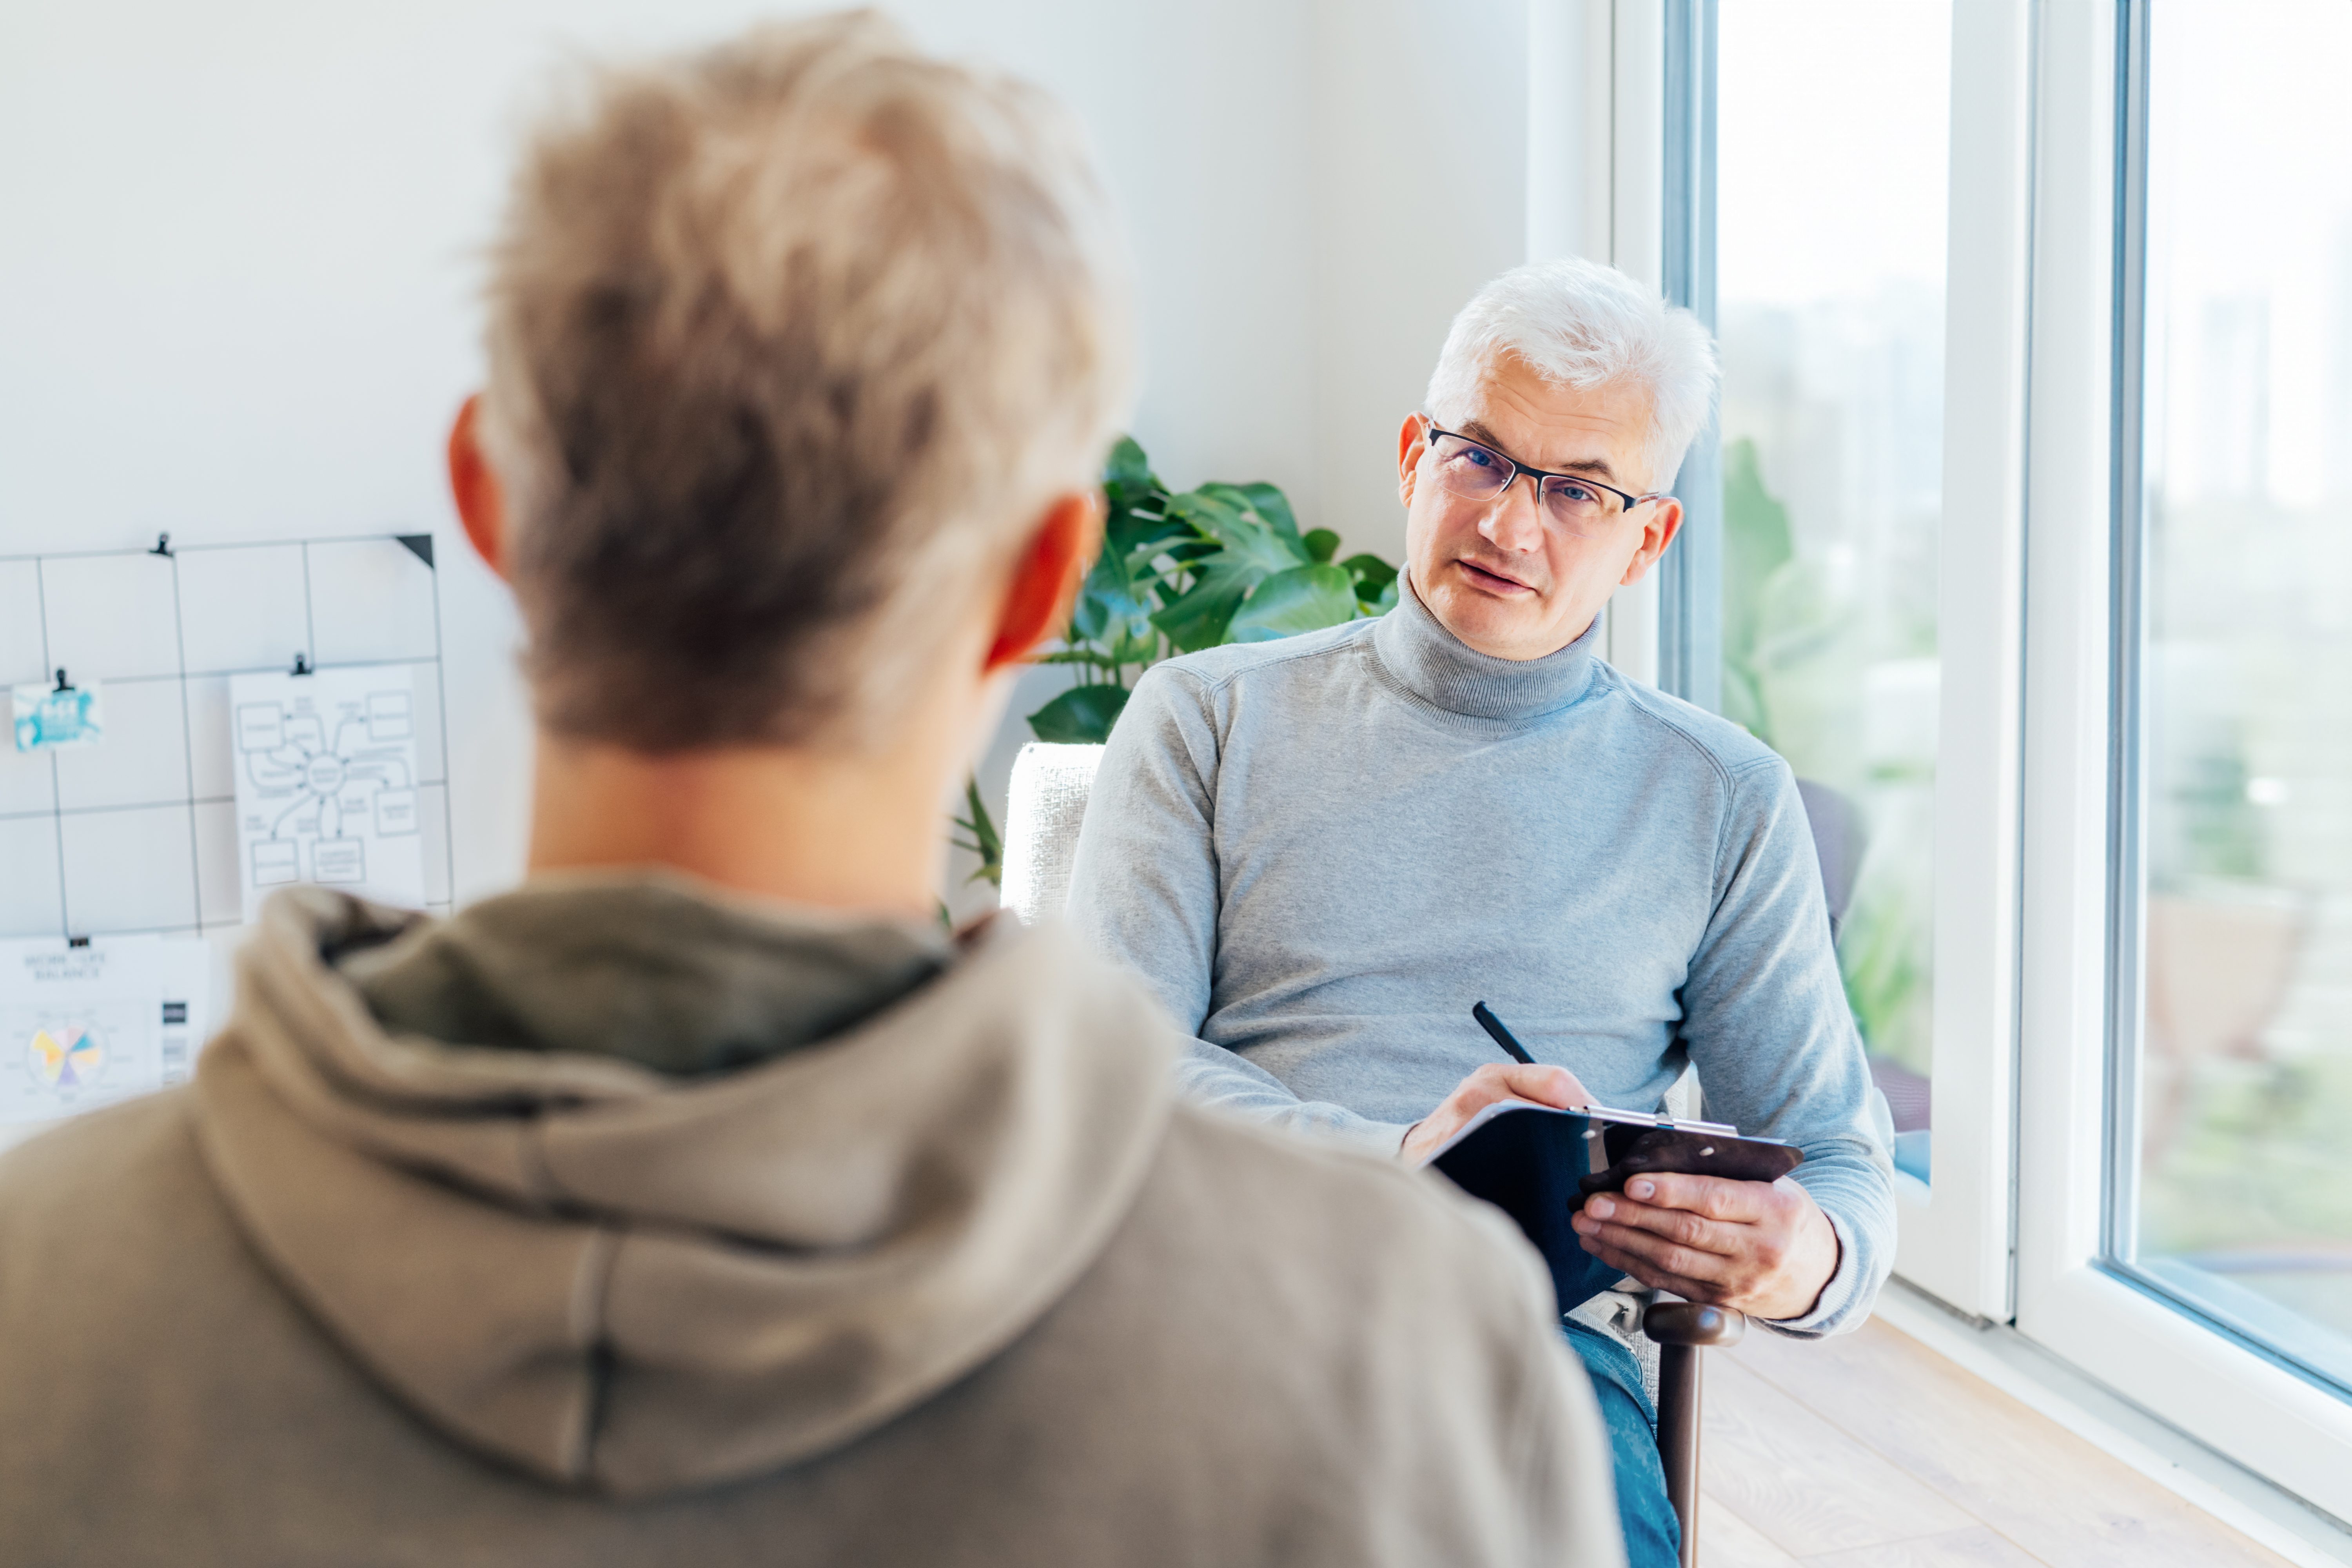 Professional psychotherapy. Male psychologist having session with patient at mental health clinic